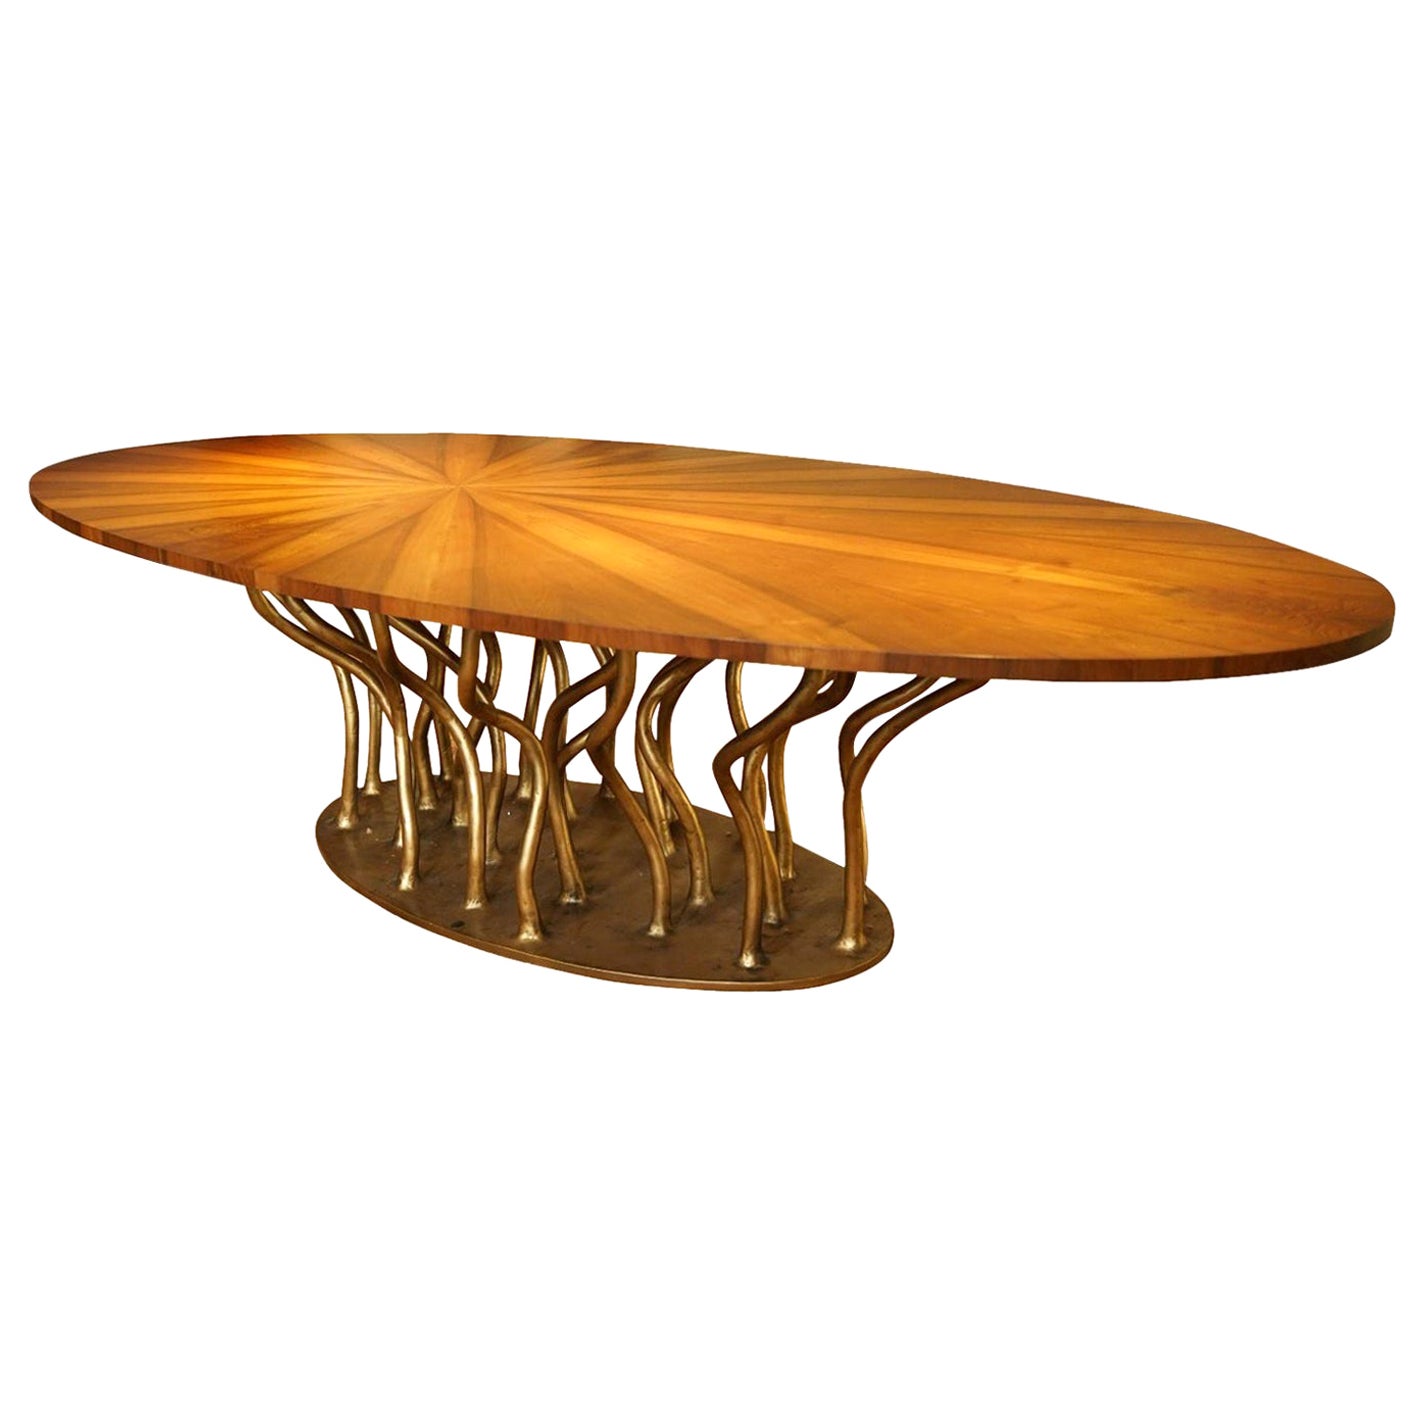 New Design Bronze Walnut Wood Dining Table Ready for Delivery Now For Sale